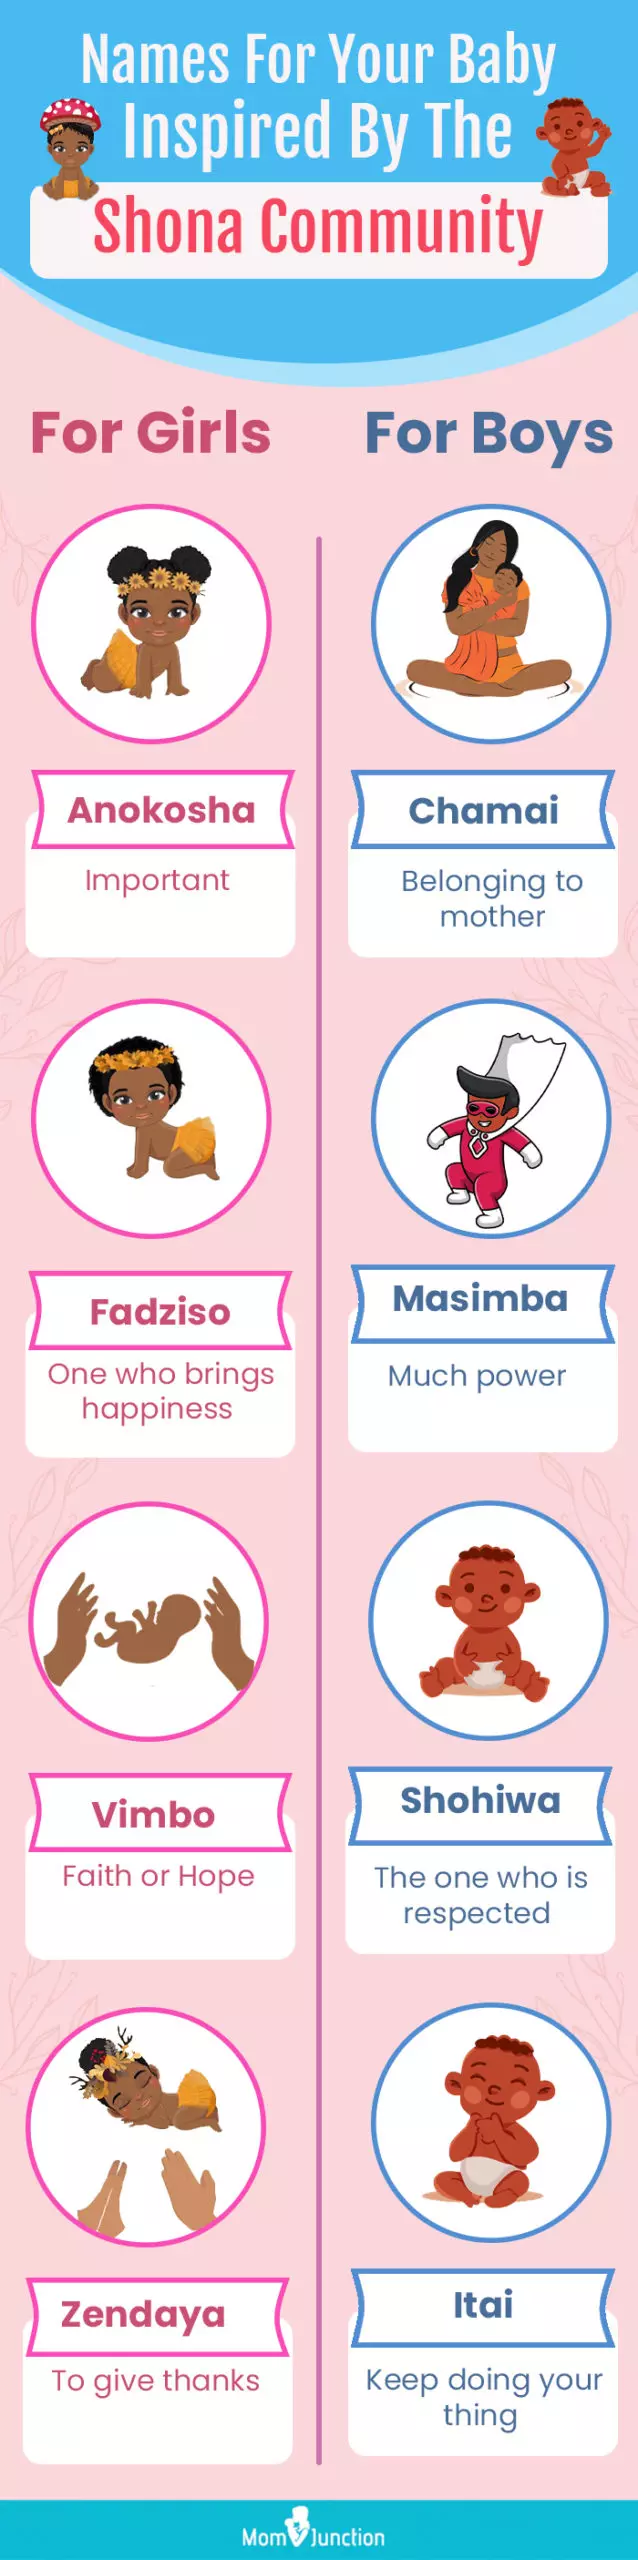 names for your baby inspired by the shona community (infographic)